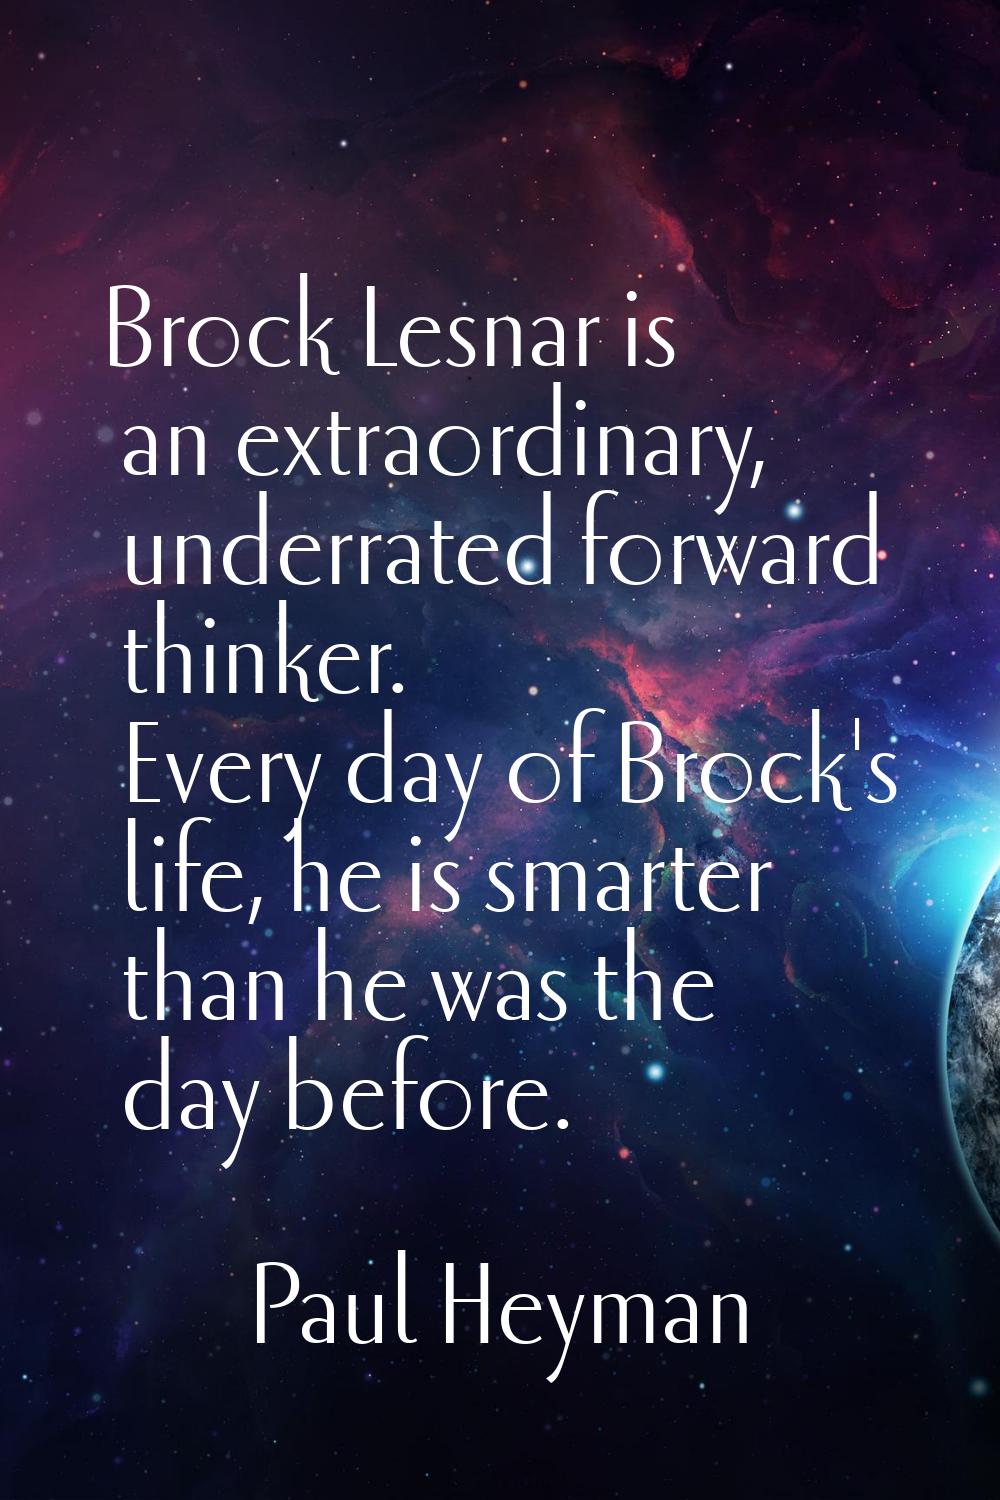 Brock Lesnar is an extraordinary, underrated forward thinker. Every day of Brock's life, he is smar